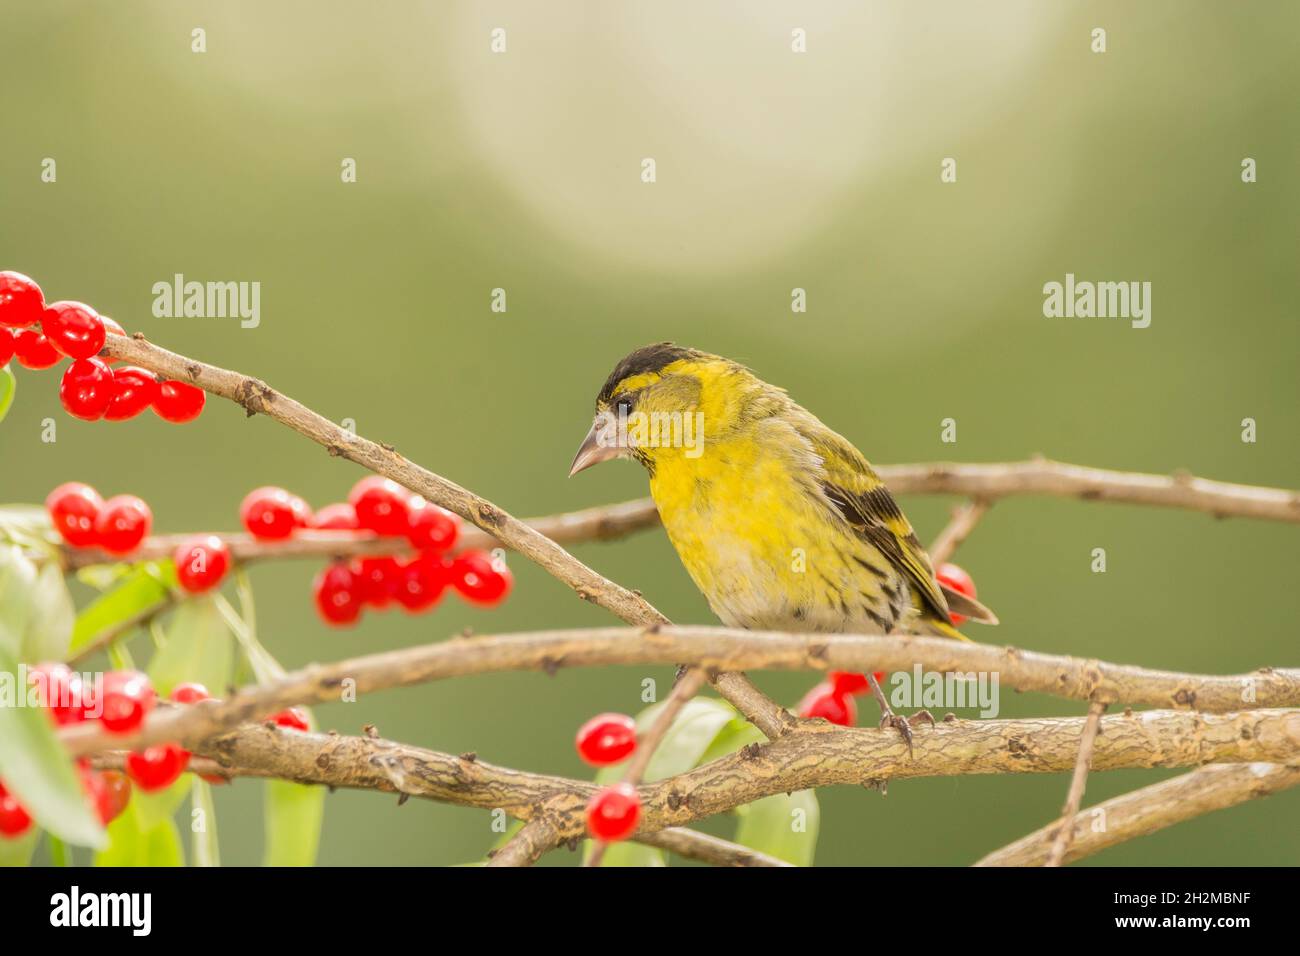 close up of a  yellow bird called siskin standing on a branch with berries Stock Photo